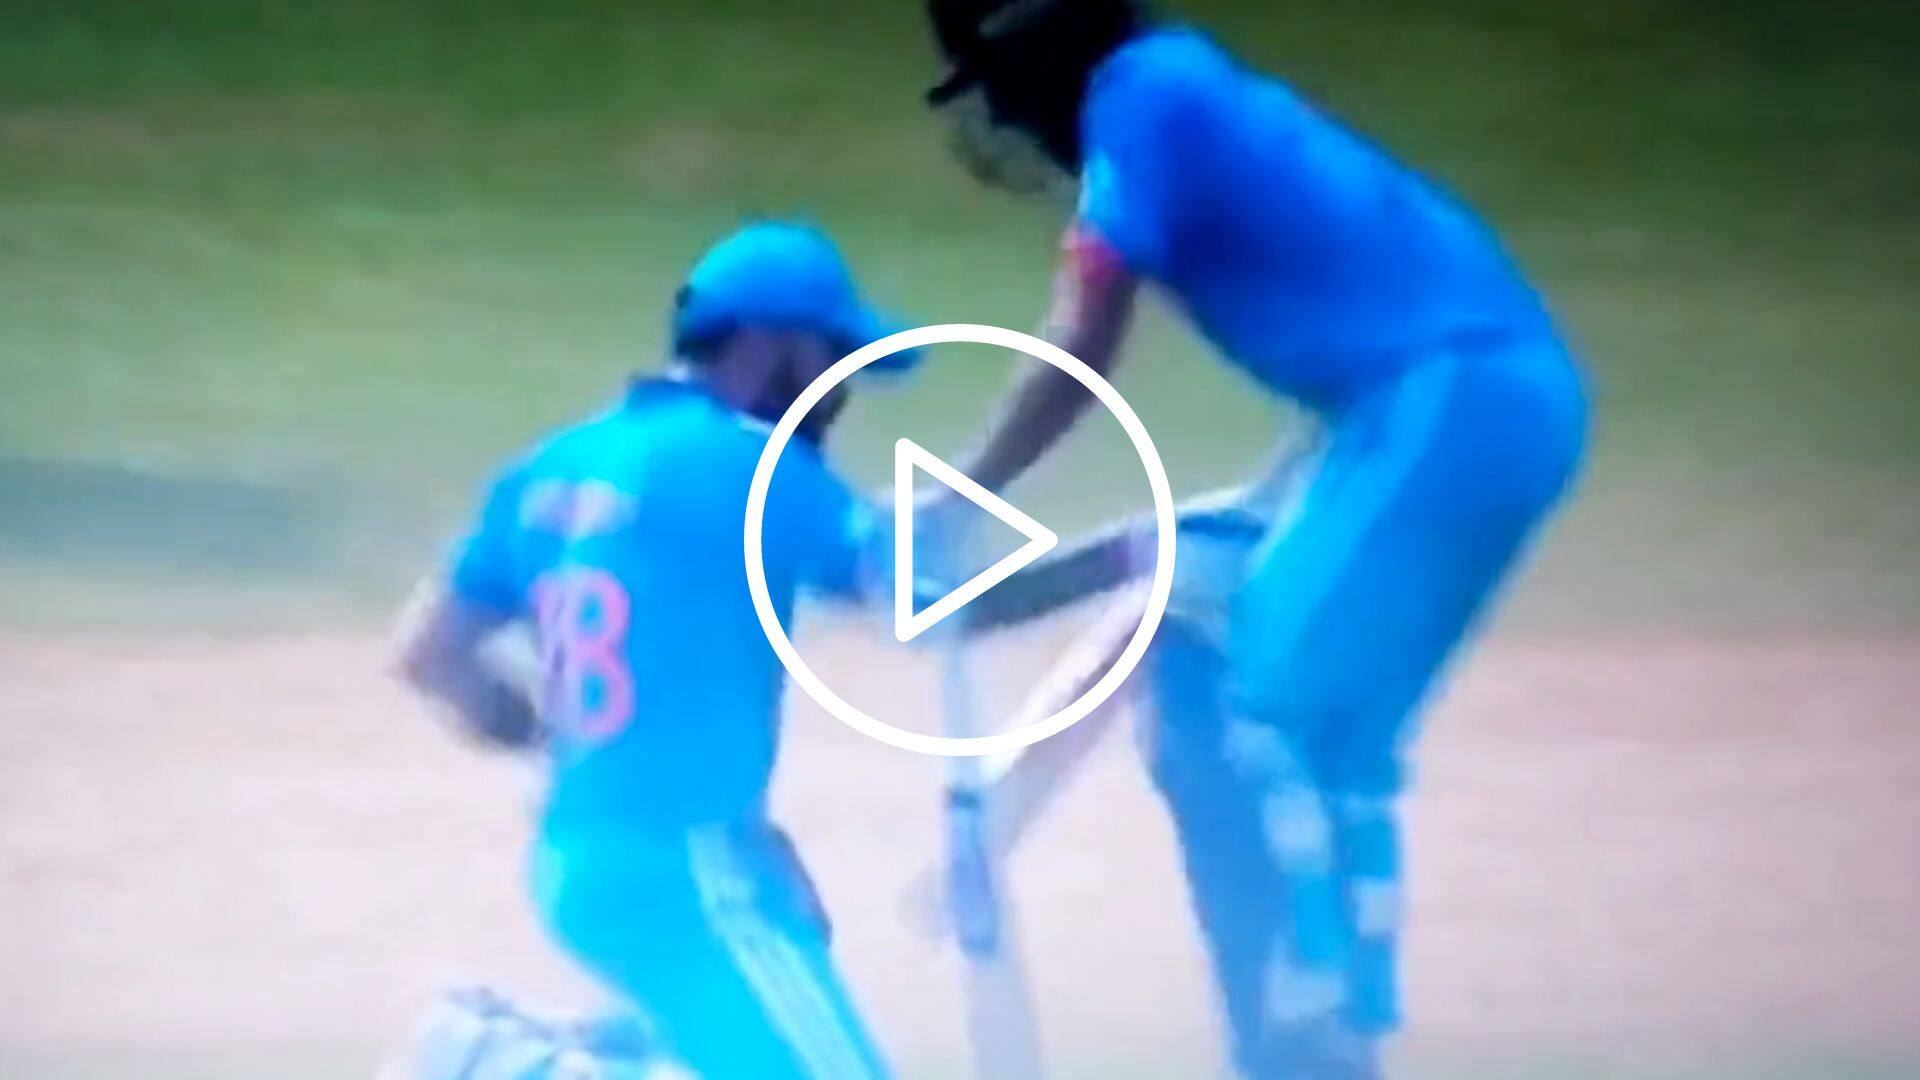 [Watch] Shubman Gill Gets 'Low Blow' From Virat Kohli During IND vs SL